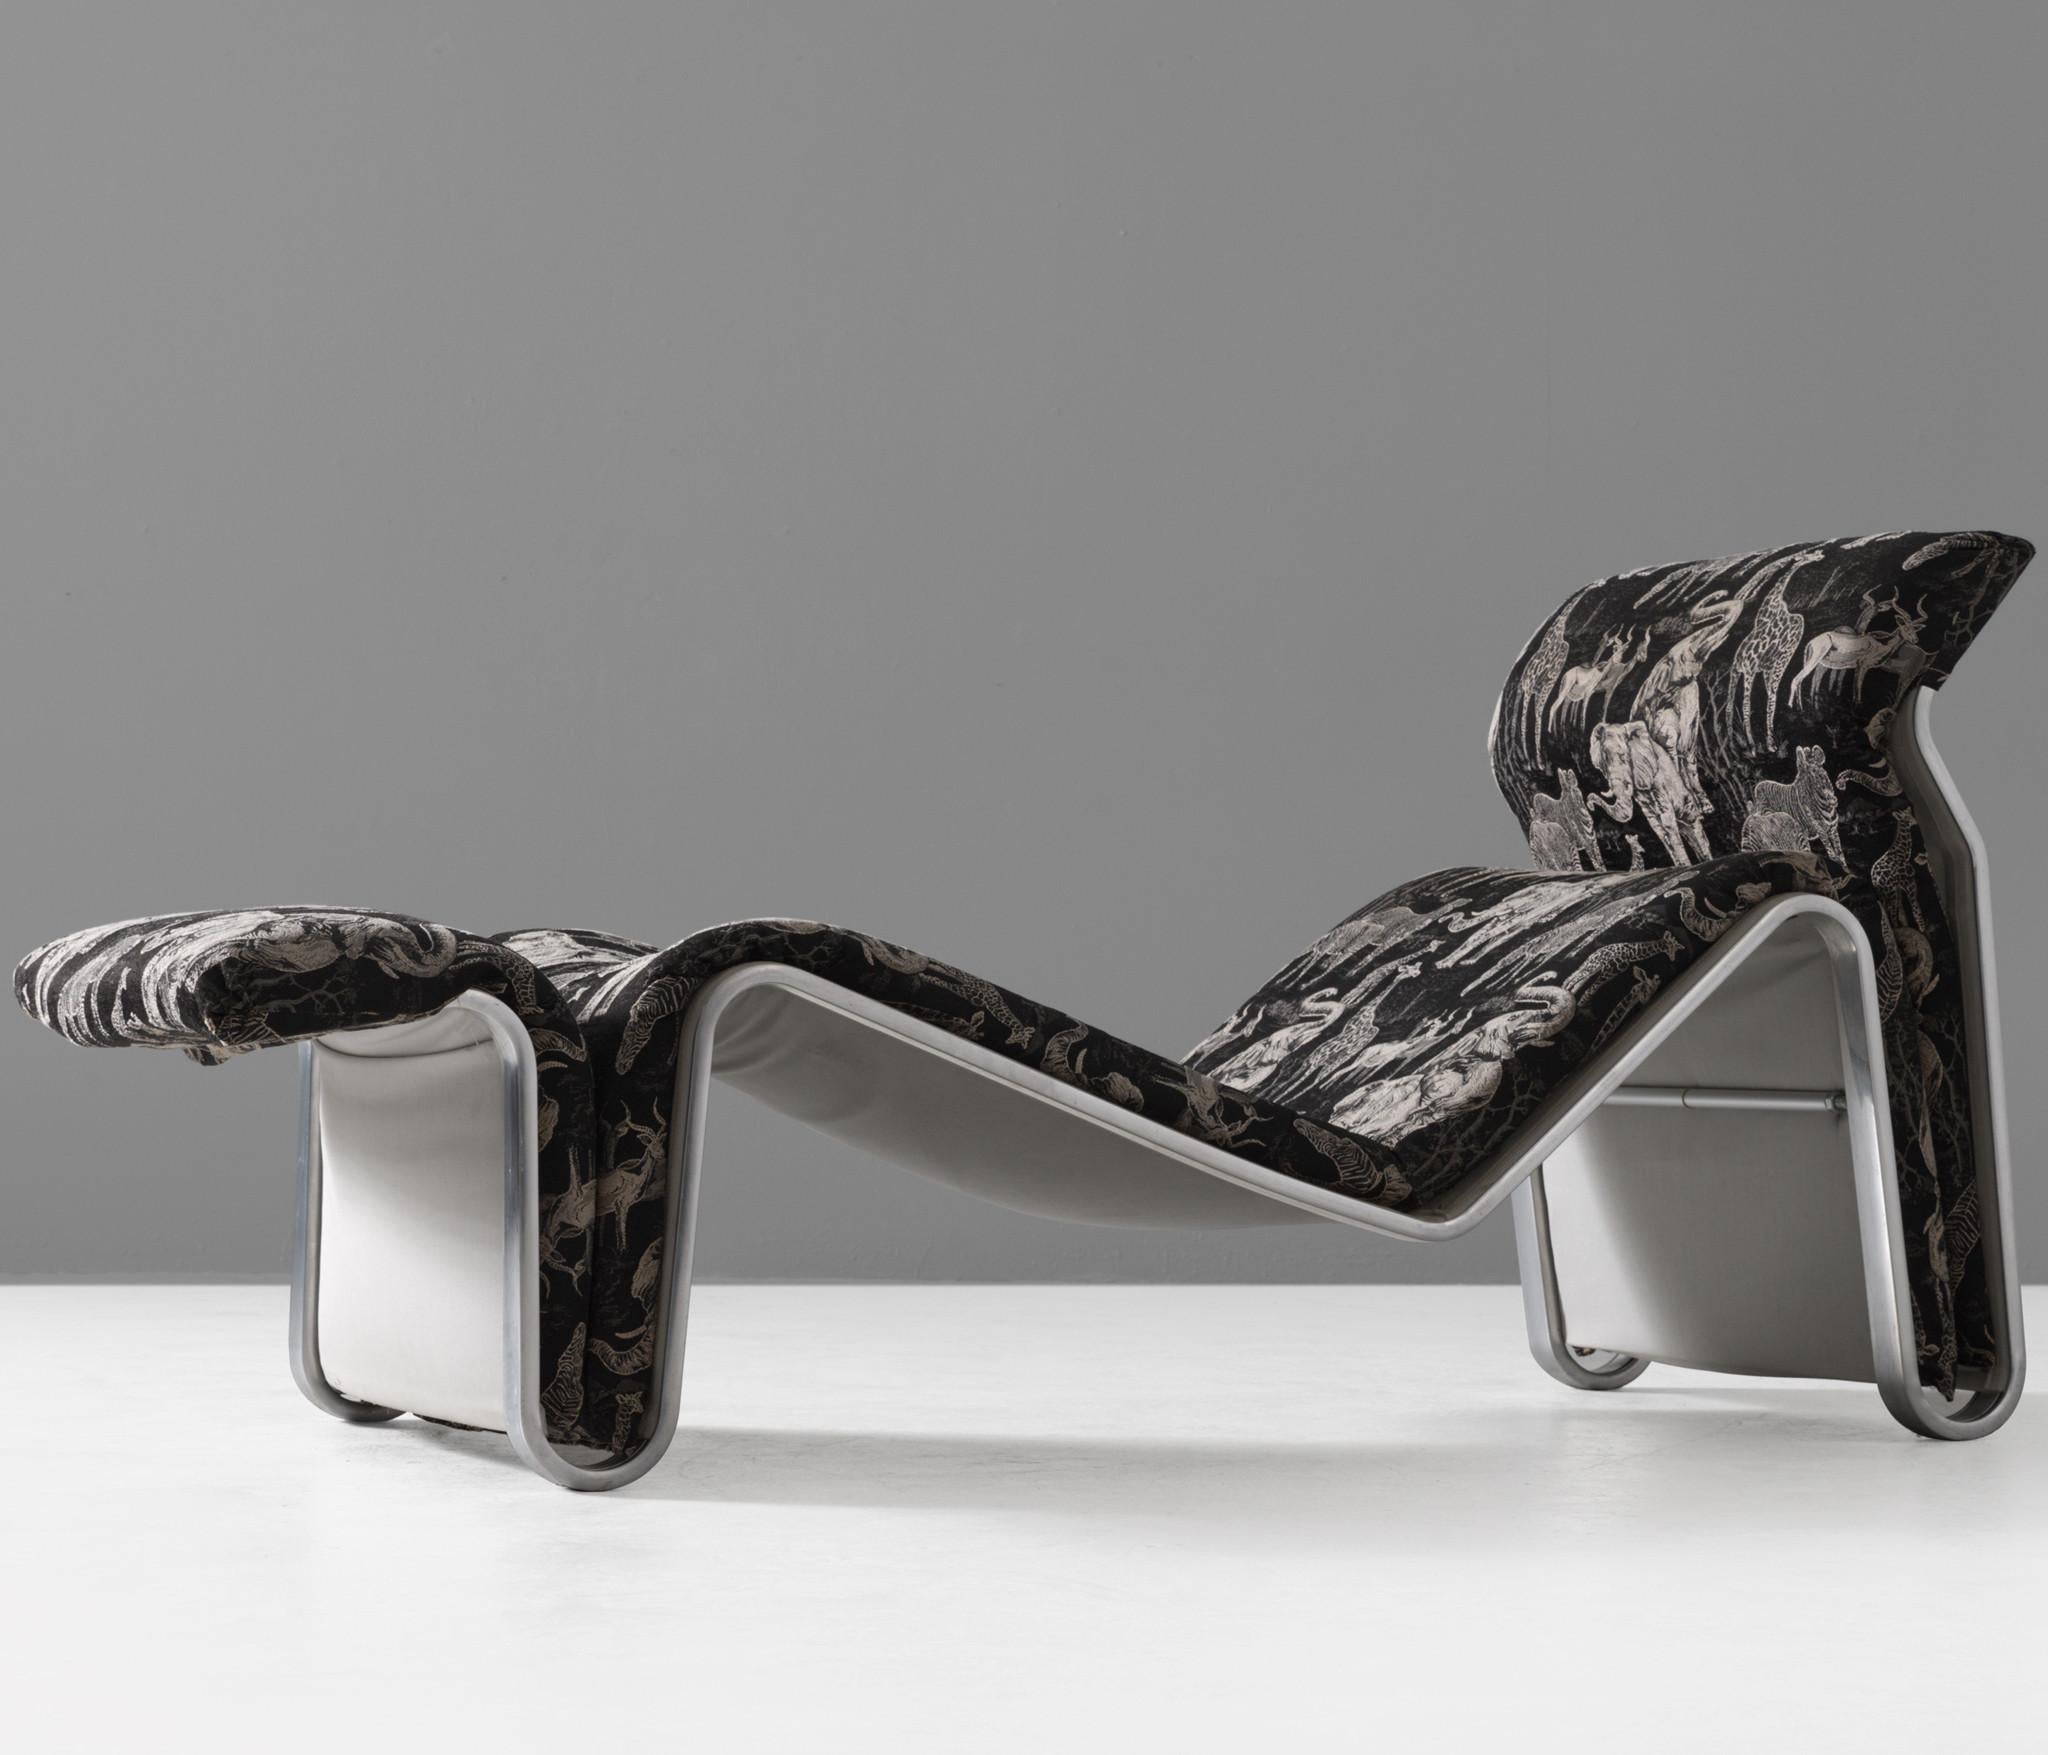 Eric Sigfrid Persson, chaise longue, aluminum, fabric, Denmark, 1970s 

A splendid piece of furniture that finds itself at the intersection of art and furniture design. The style of this chaise longue is based on refined geometry featuring an